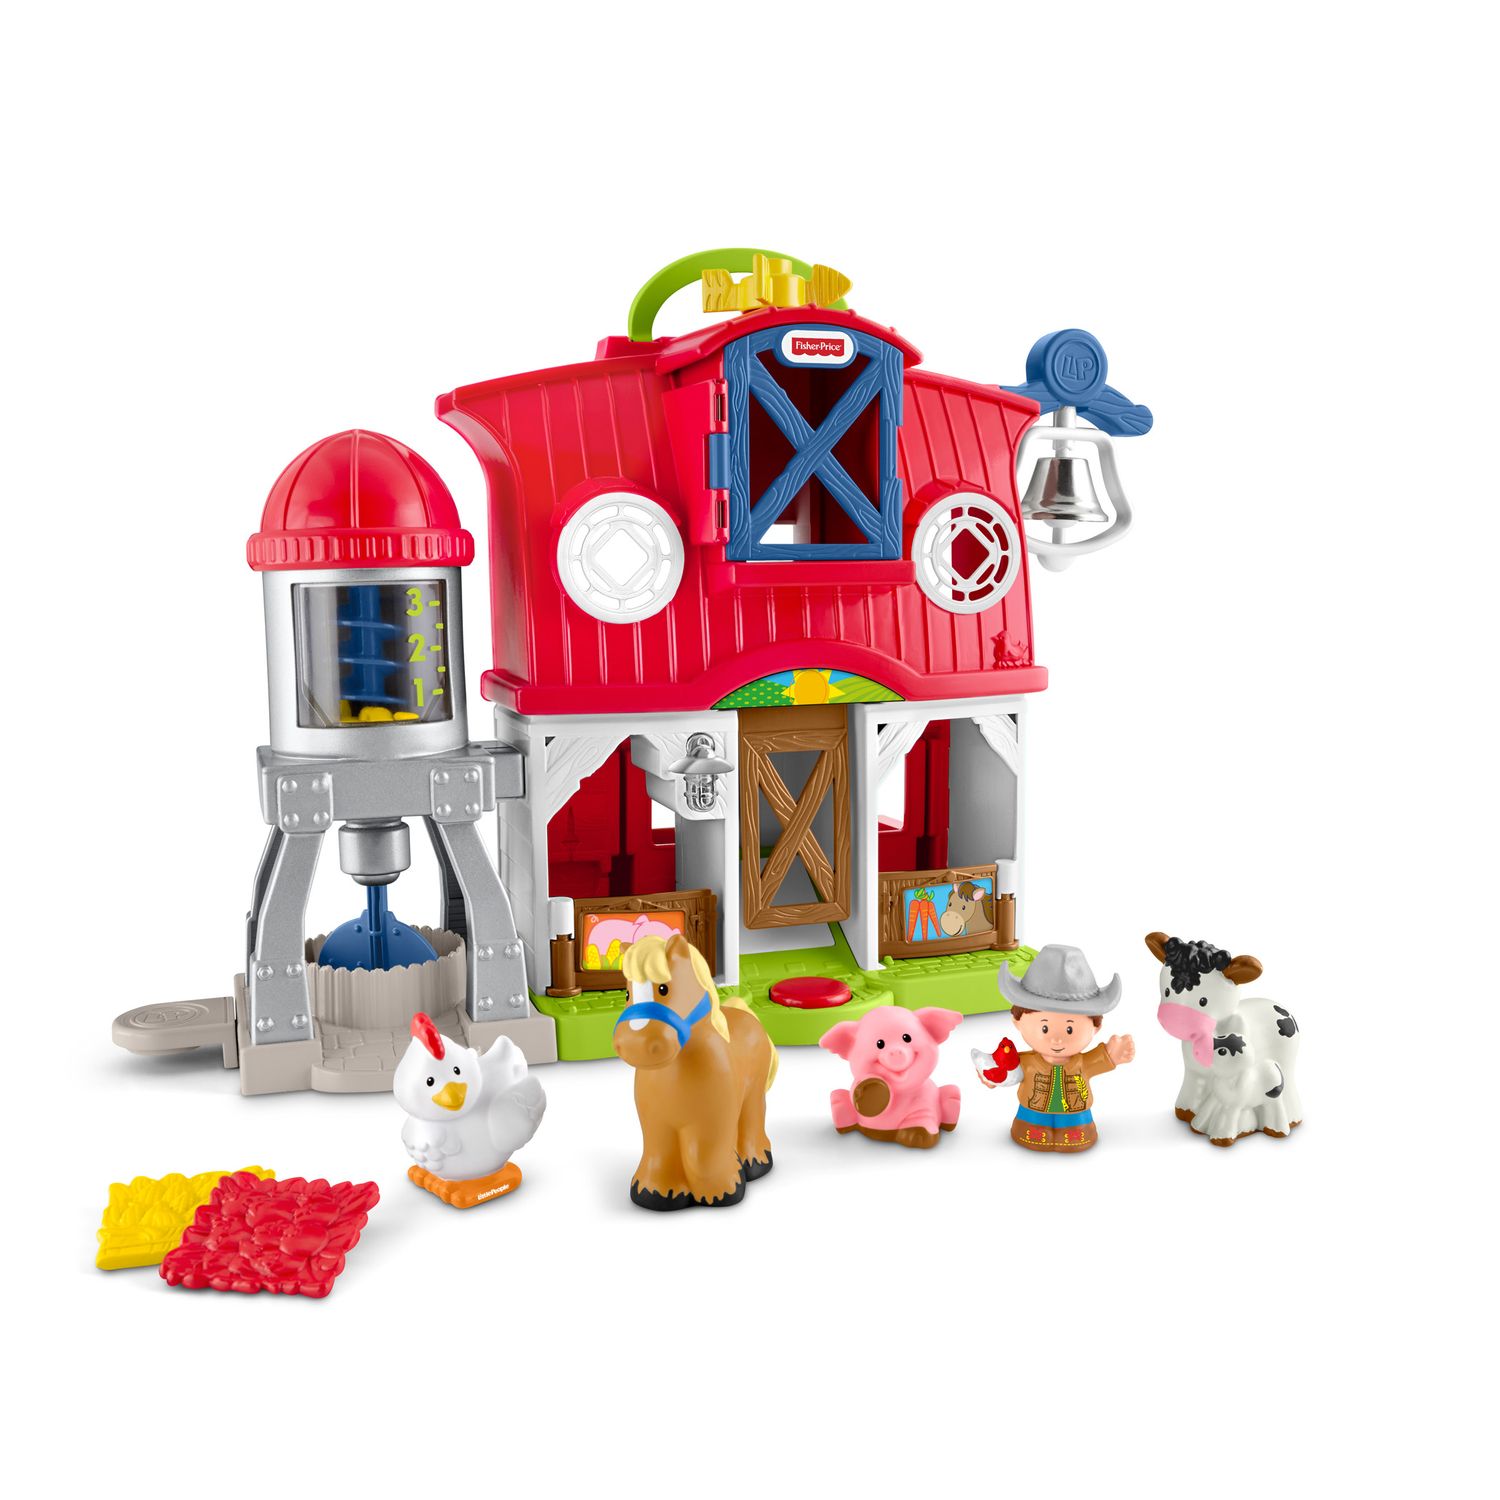 fisher price little people farm animals